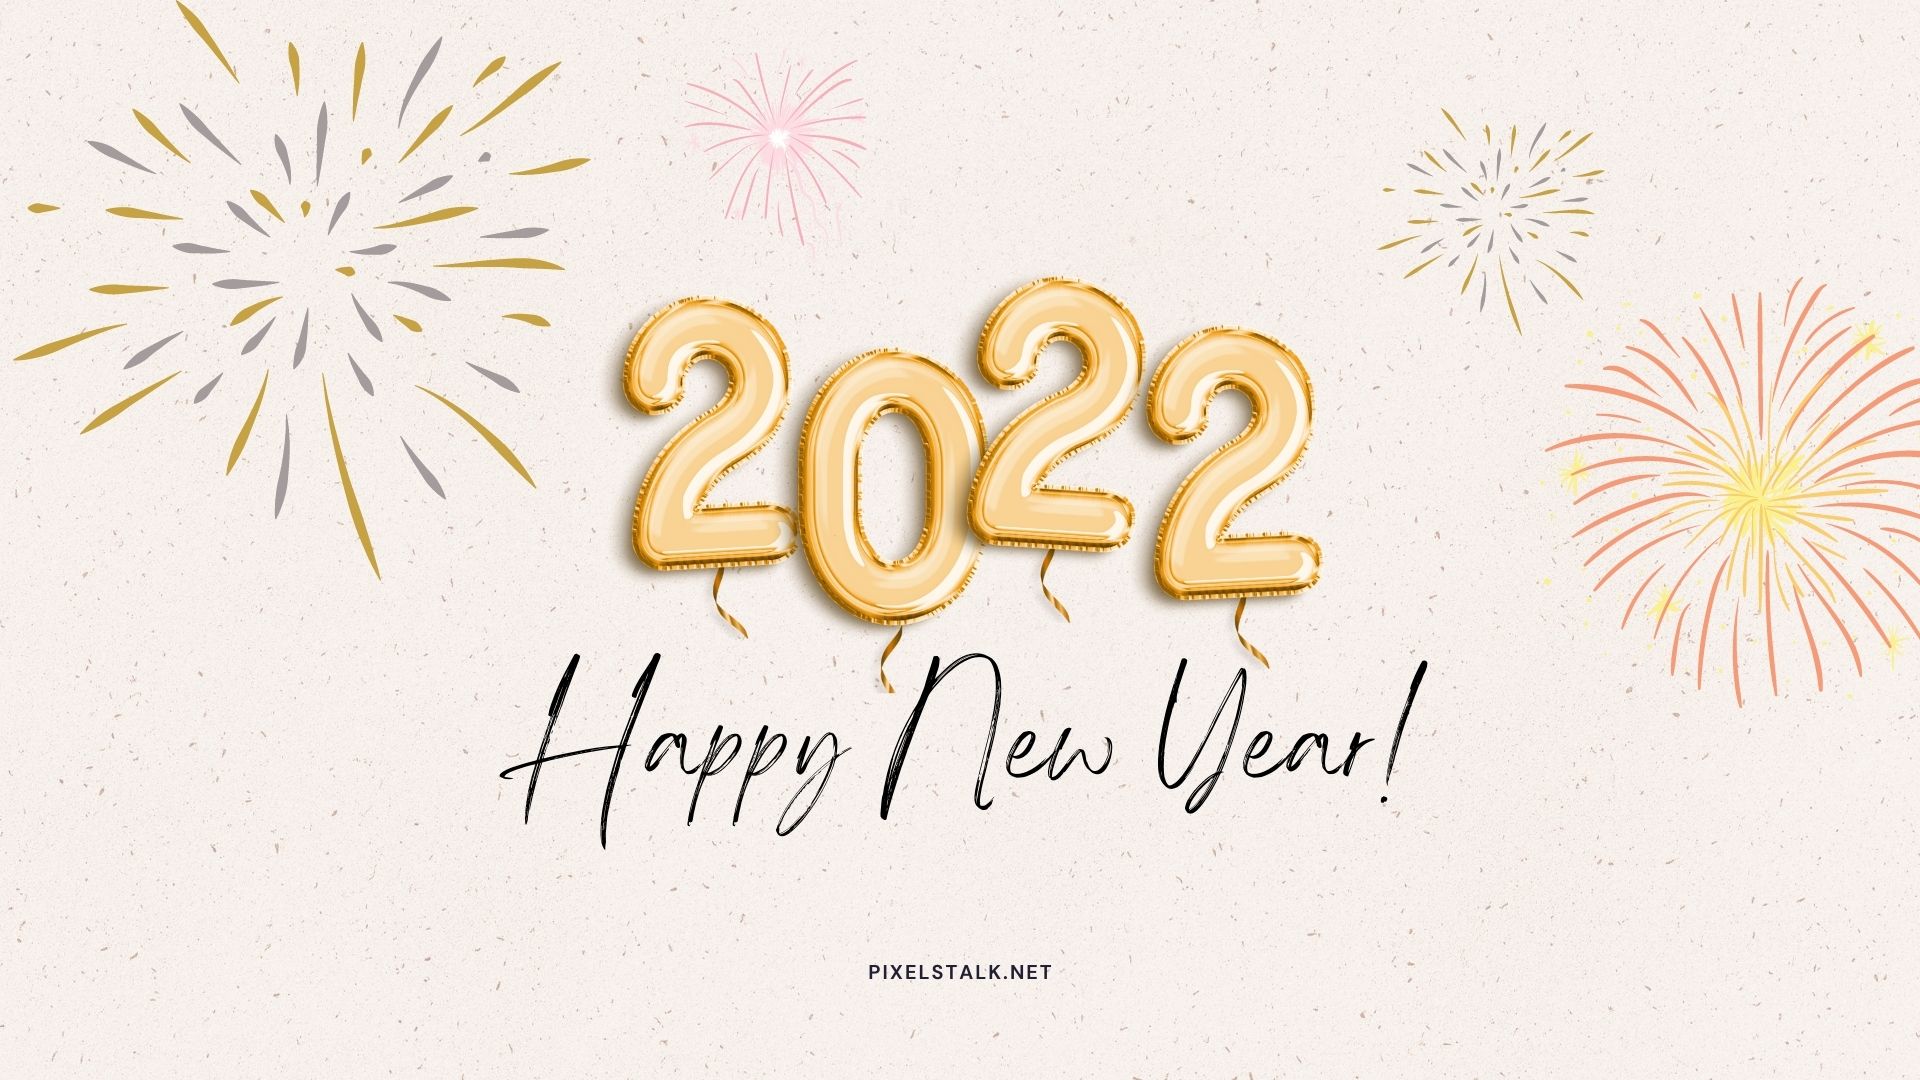 Happy New Year Wallpapers HD free download 